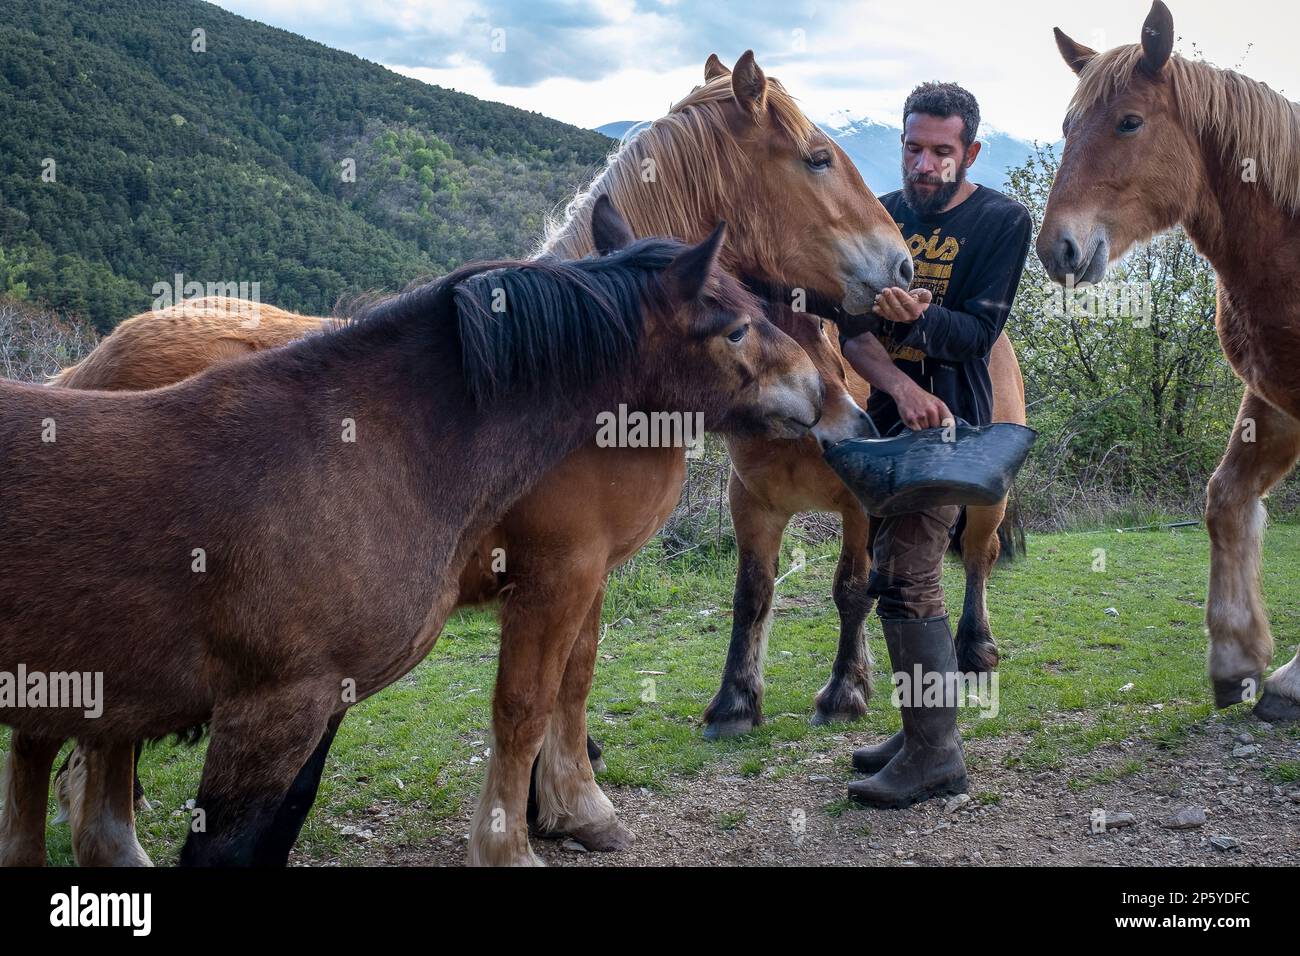 Miquel at work. Daily life, in a traditional farm on the mountains, Roni village, Alt Pirineu Natural Park, Lleida, Catalonia, Spain Stock Photo